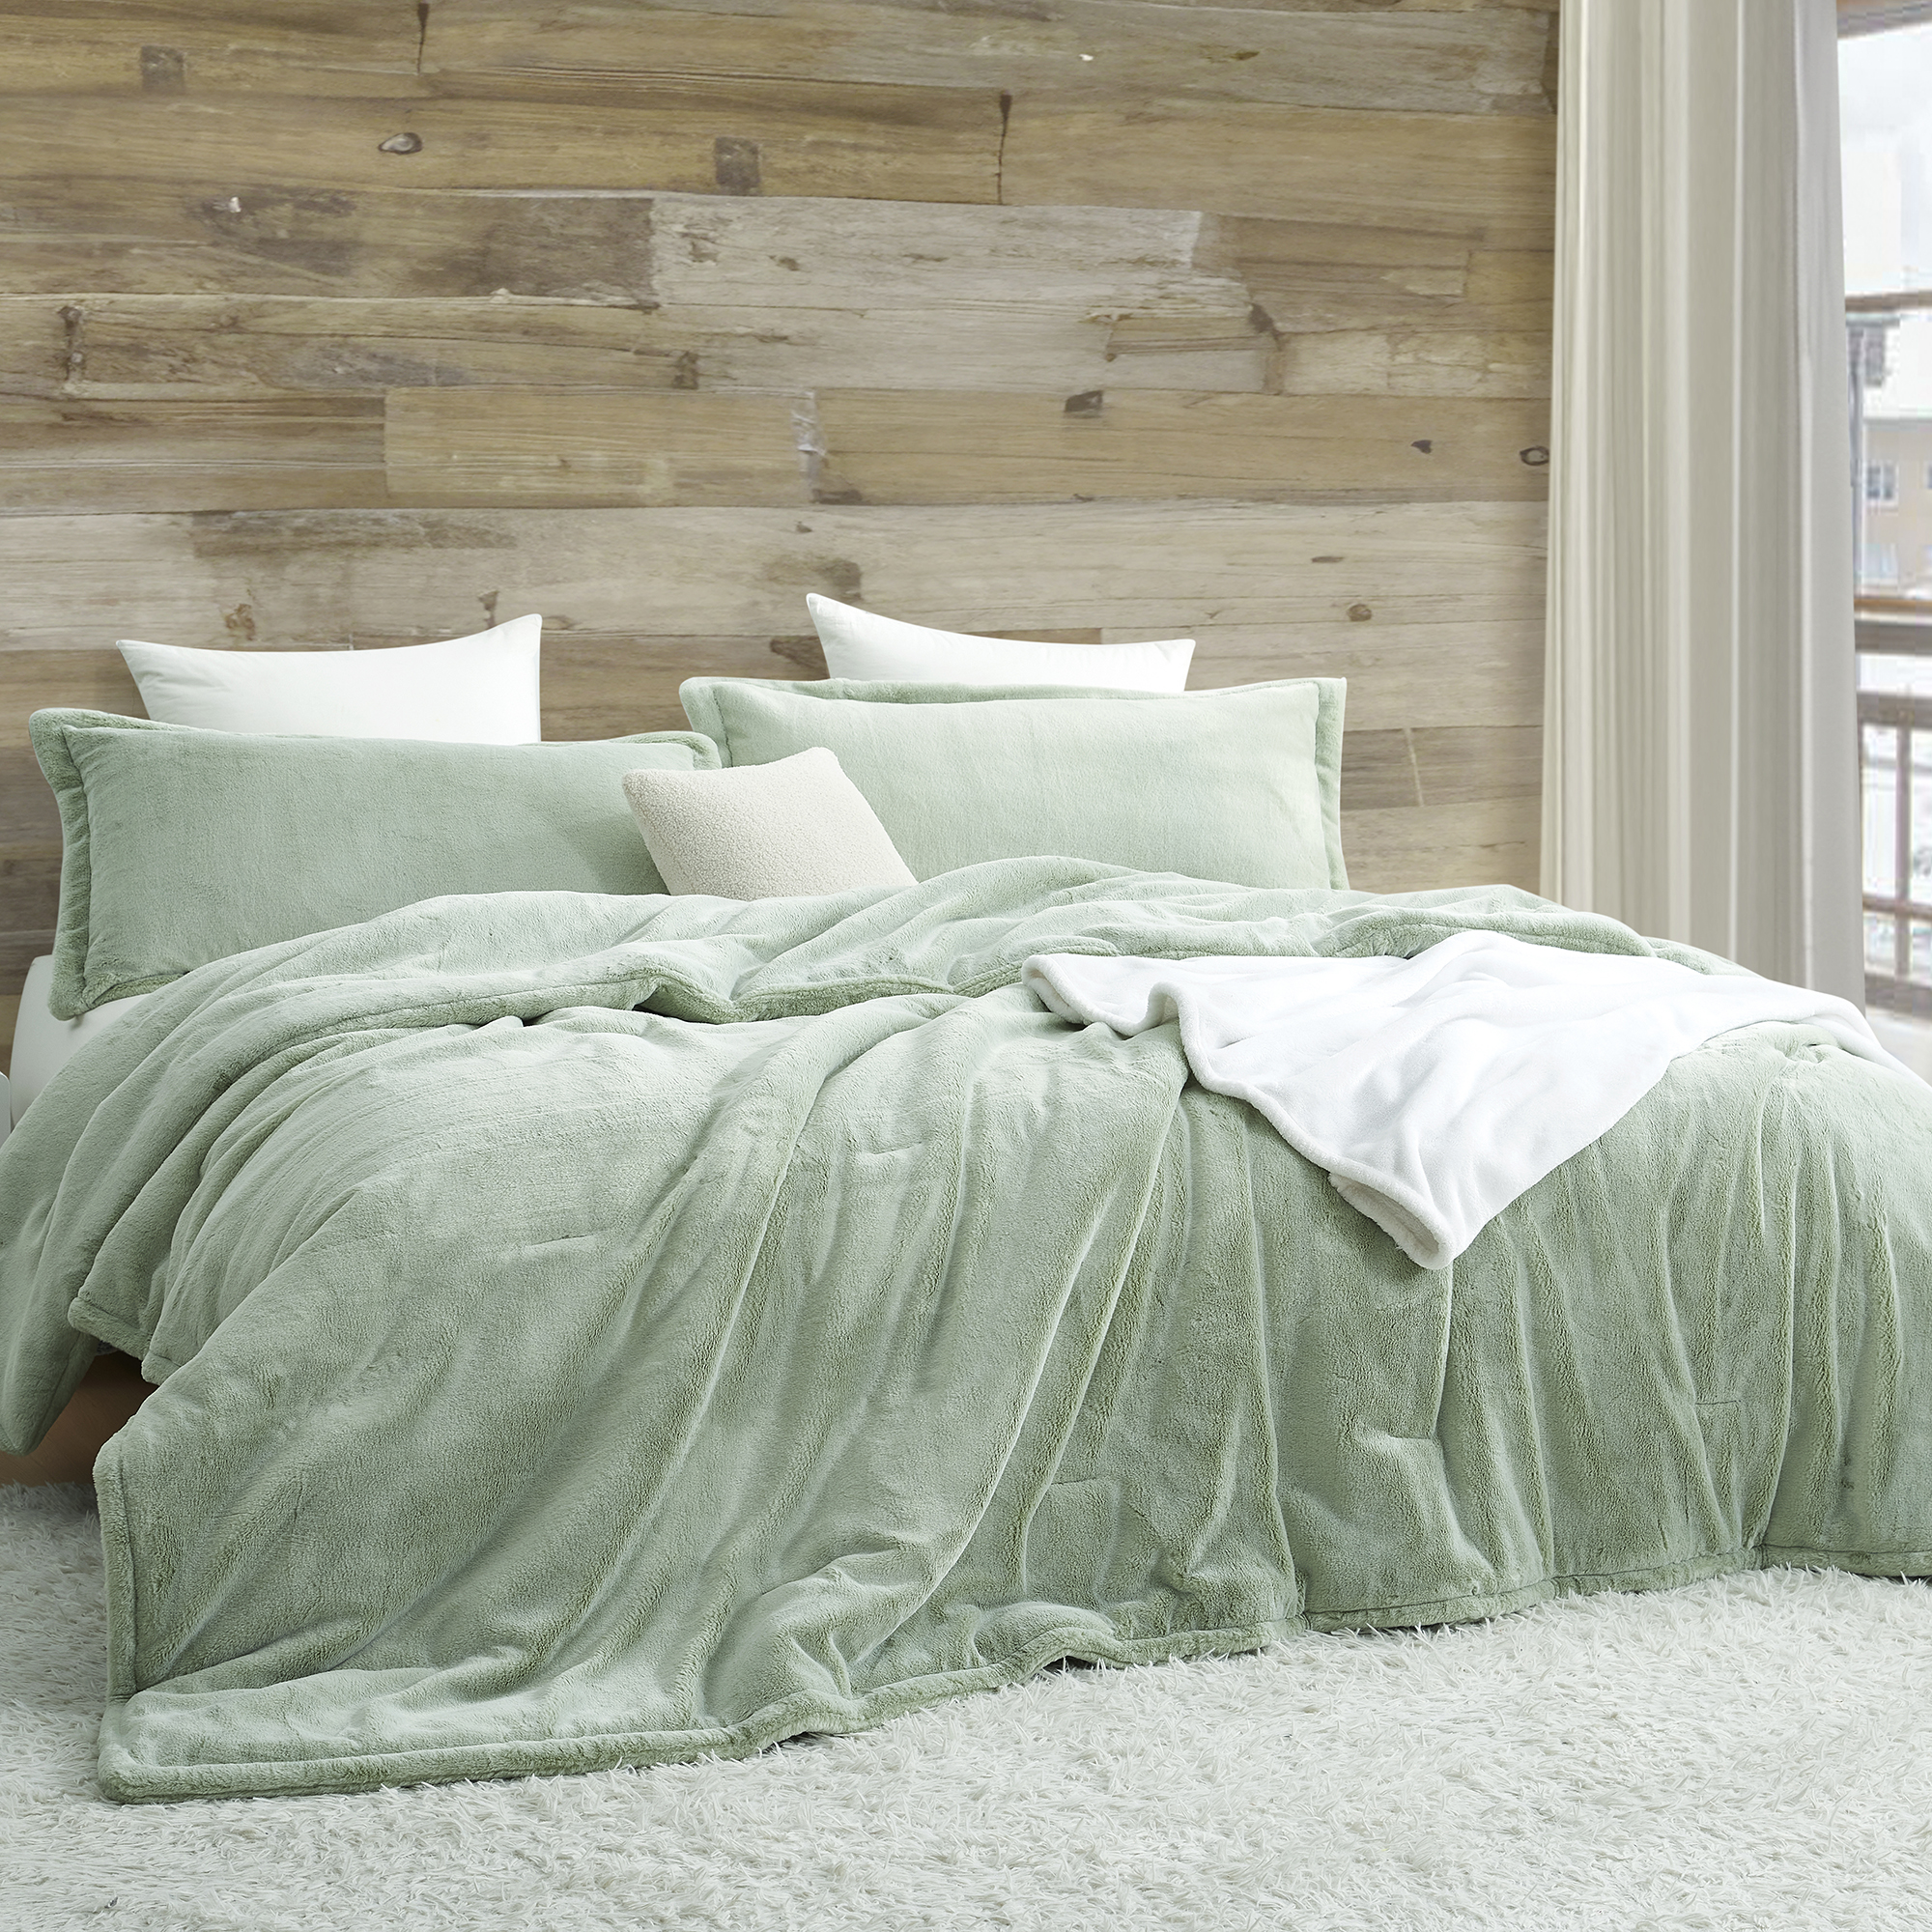 Frost Bite - Coma Inducer® Oversized Comforter - Frosted Green